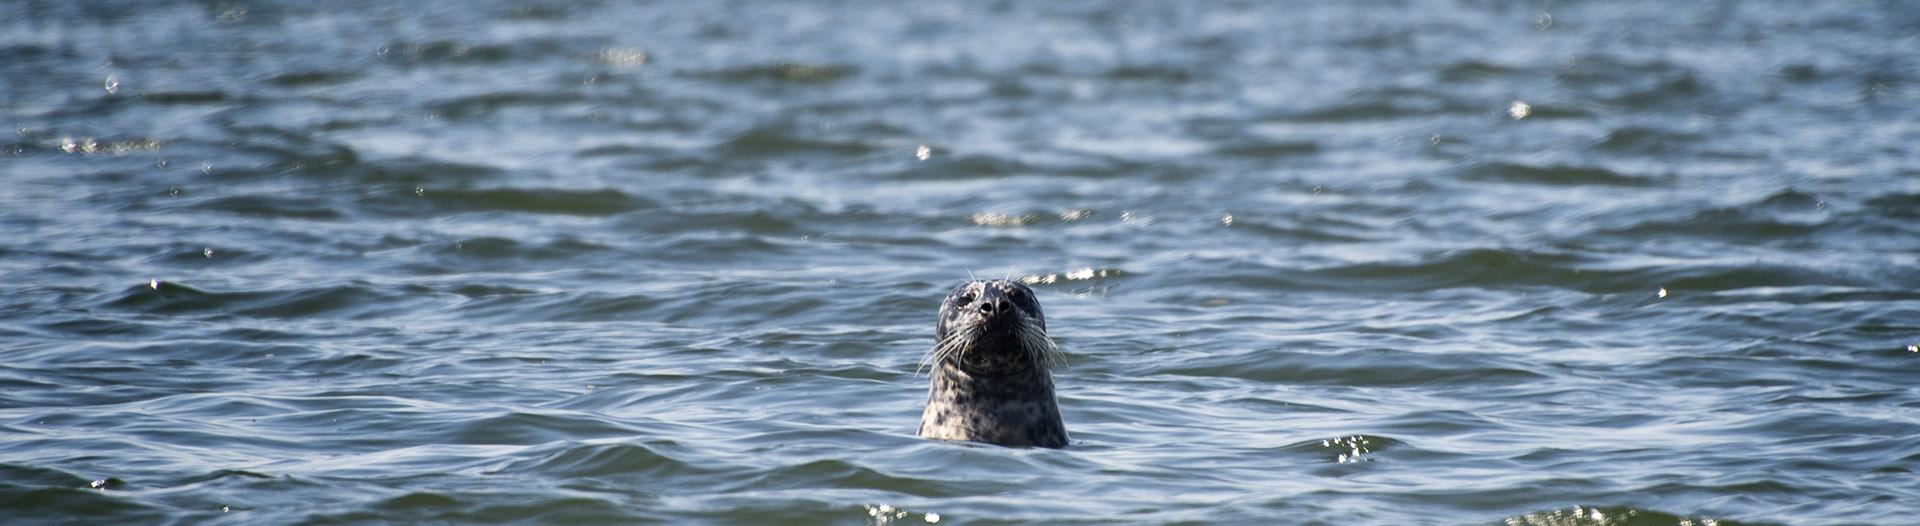 A seal in Commencement Bay